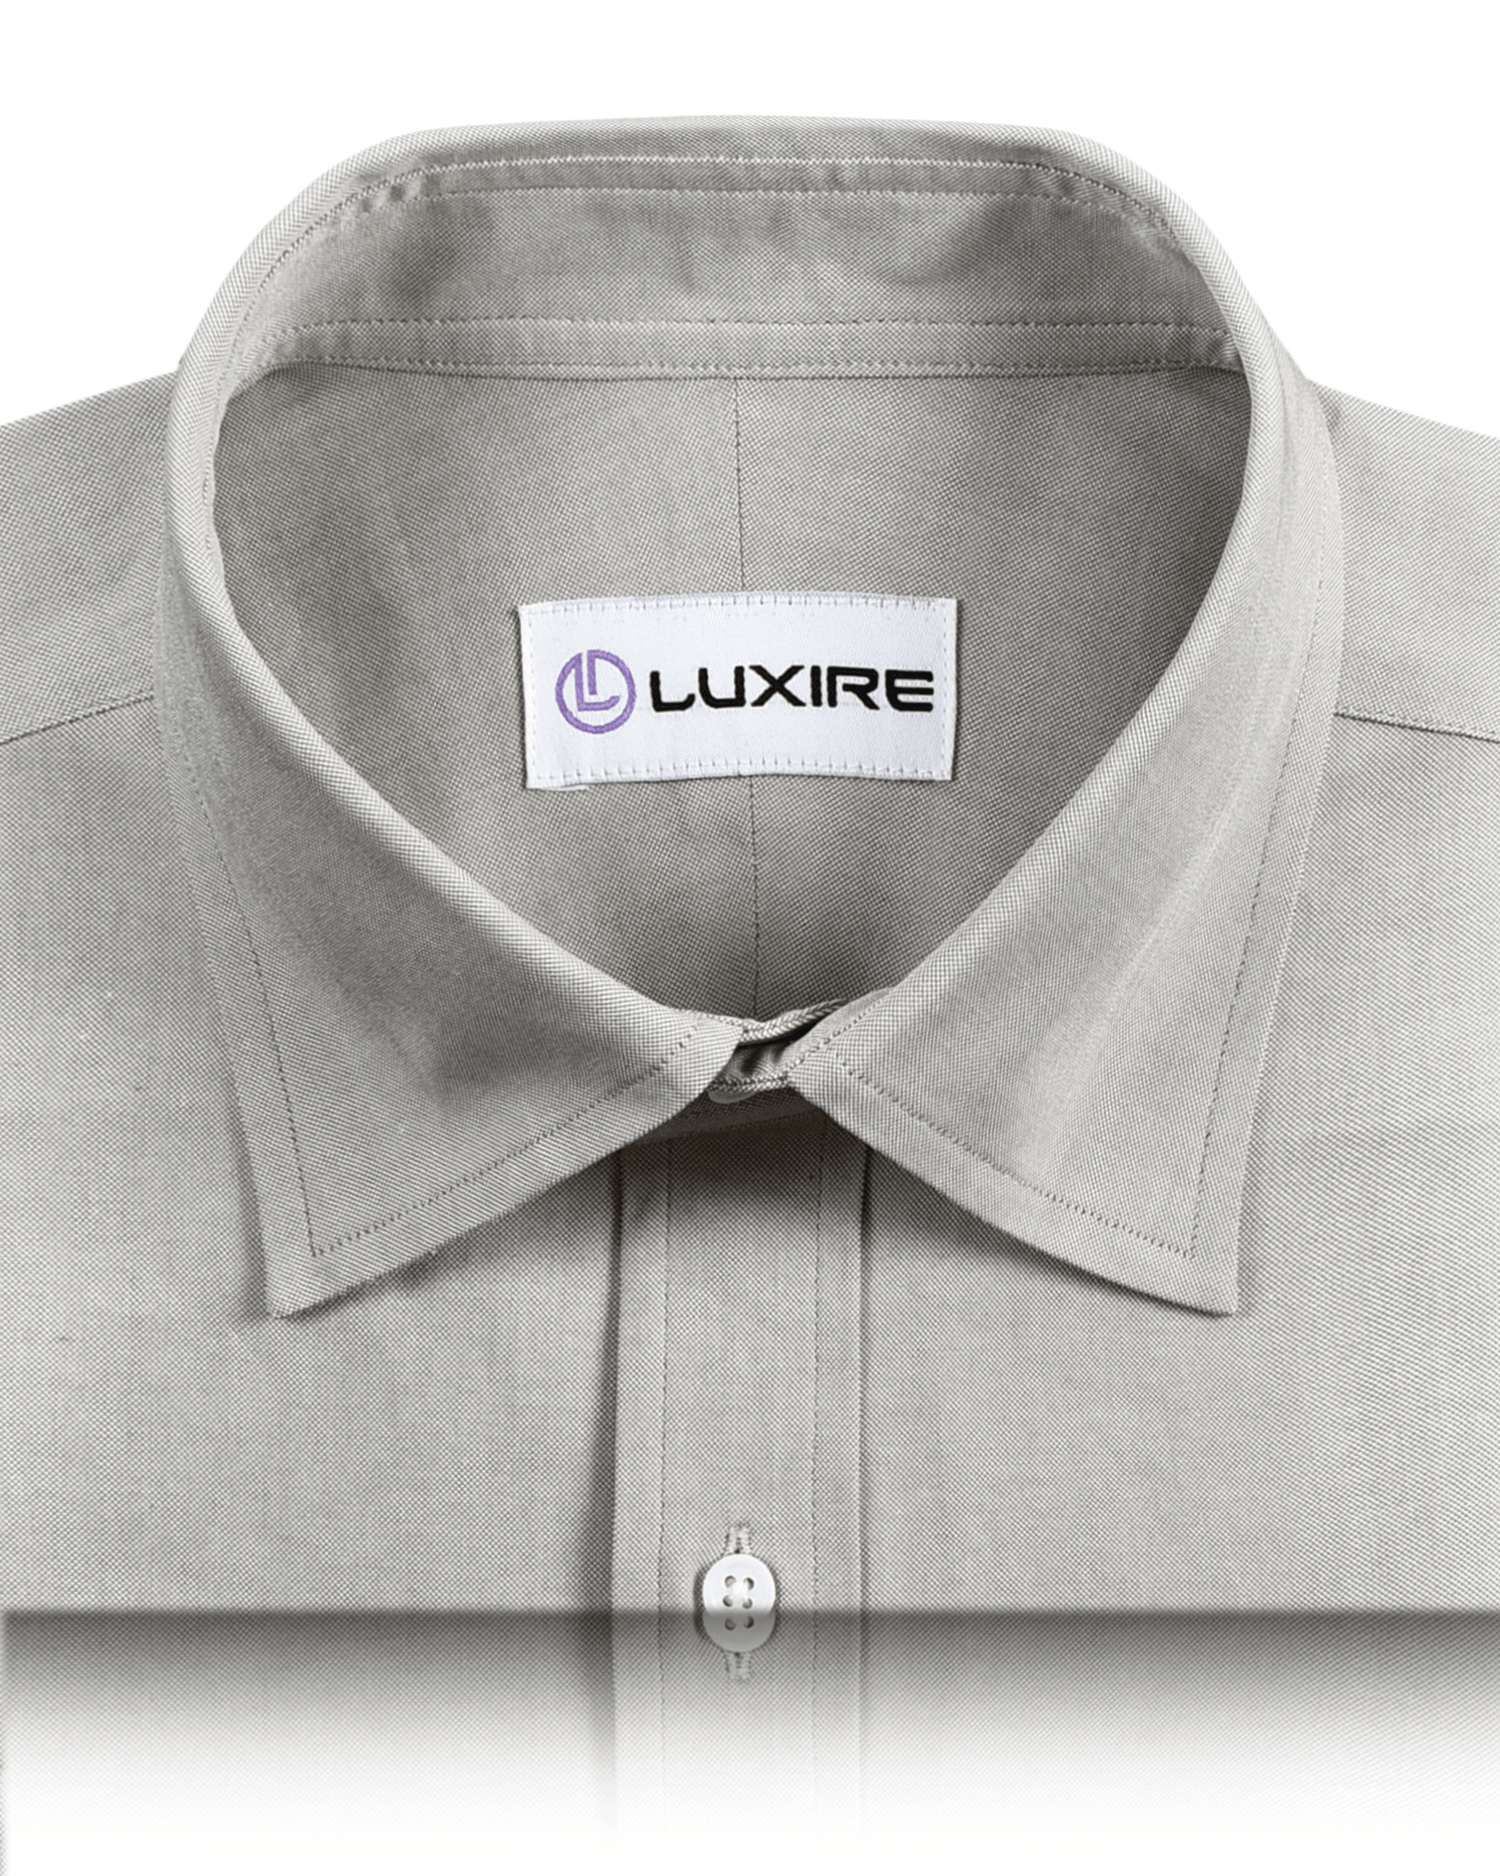 Collar of the custom oxford shirt for men by Luxire in ecru